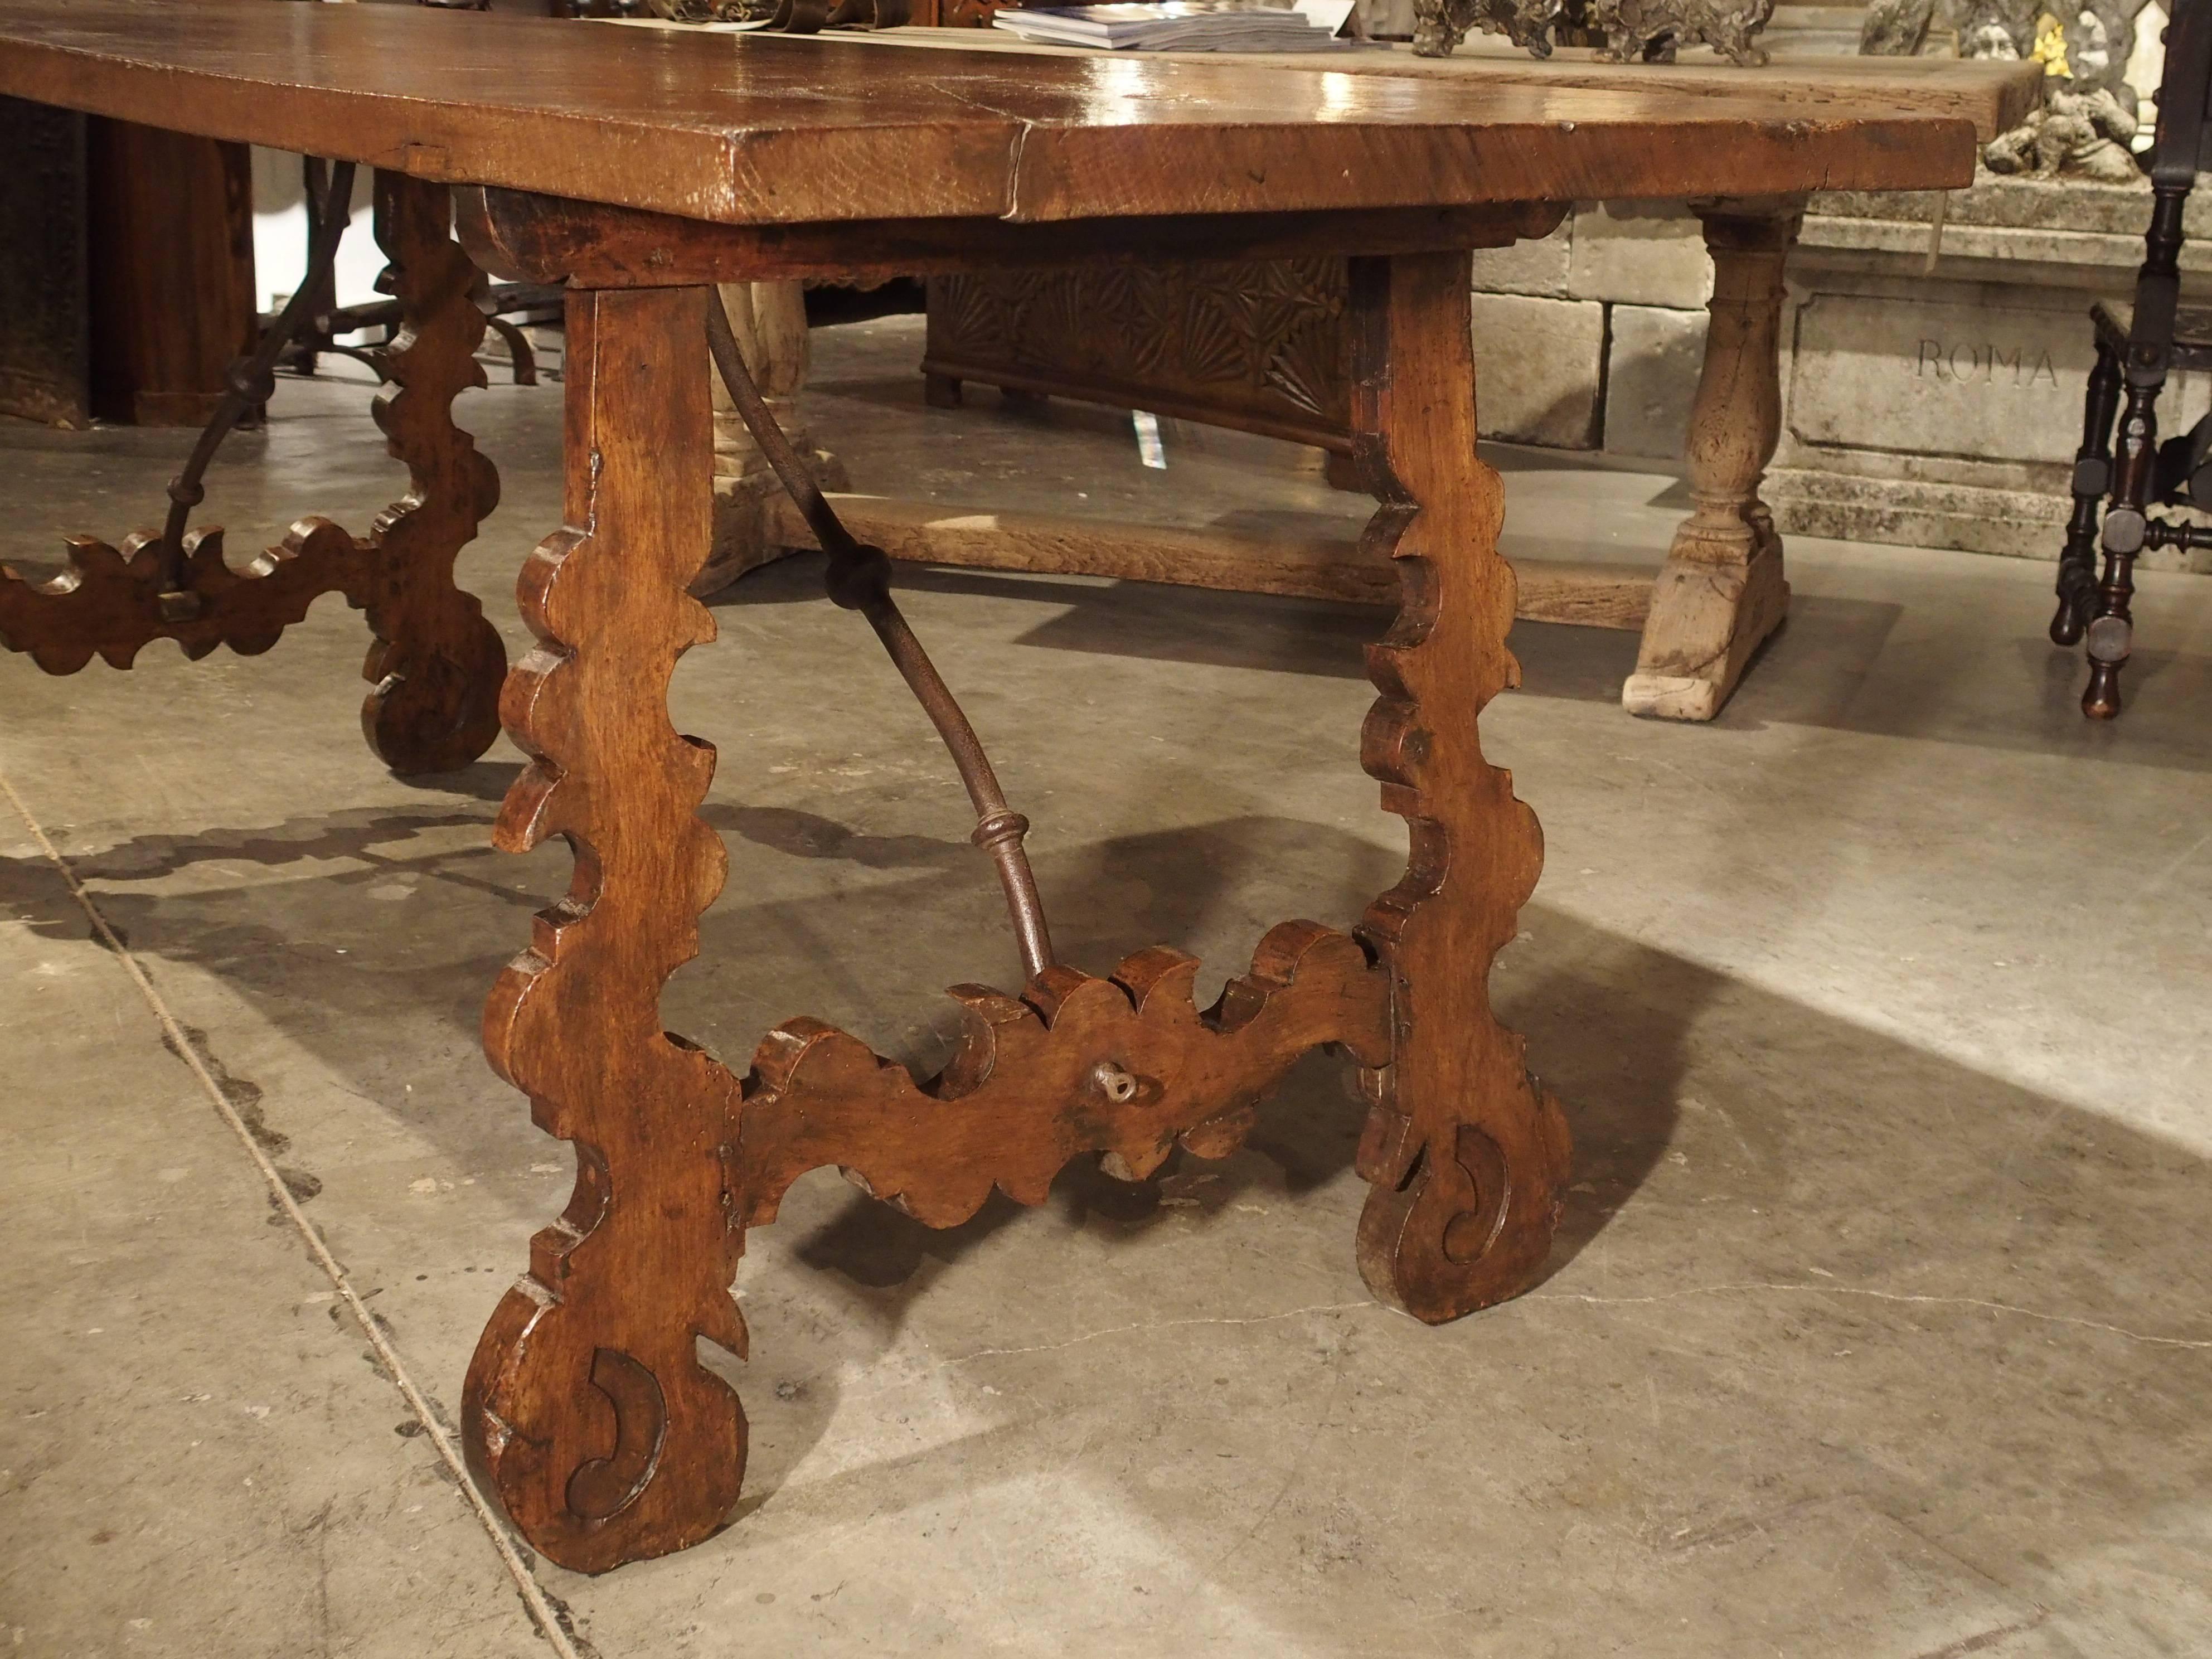 Single Plank Oak and Walnut Wood Refectory Table from Spain, 18th Century For Sale 2